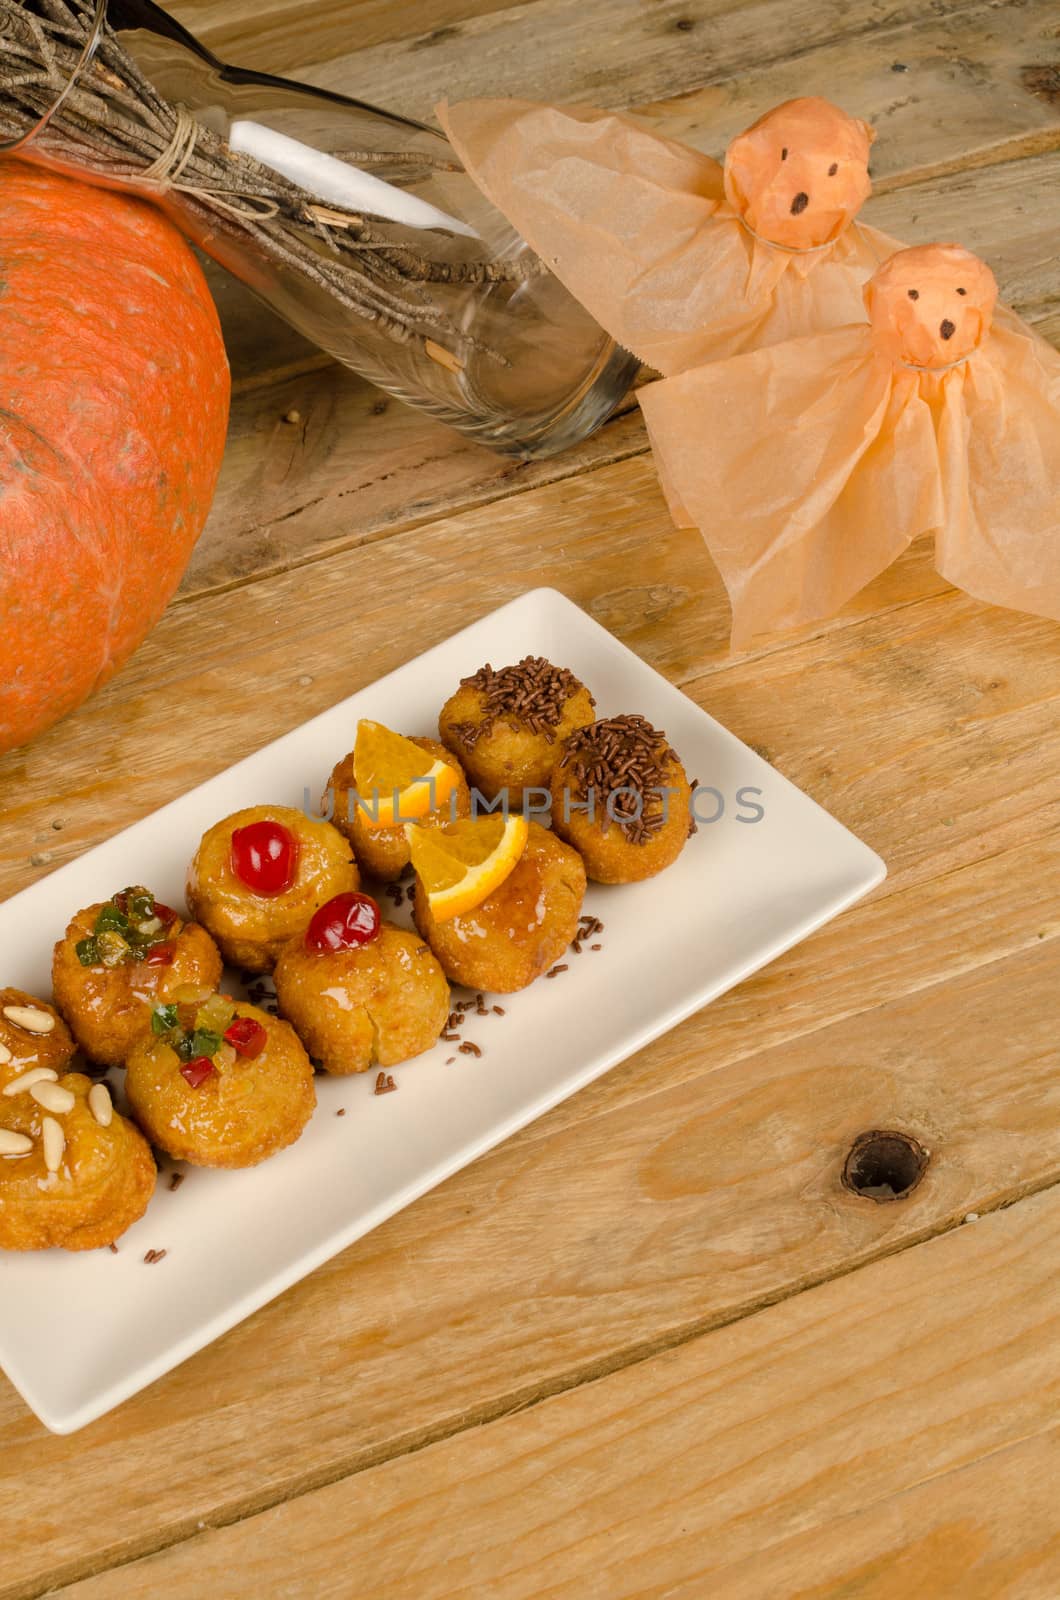 Traditional Spanish halloween biscuits, homemade panellets